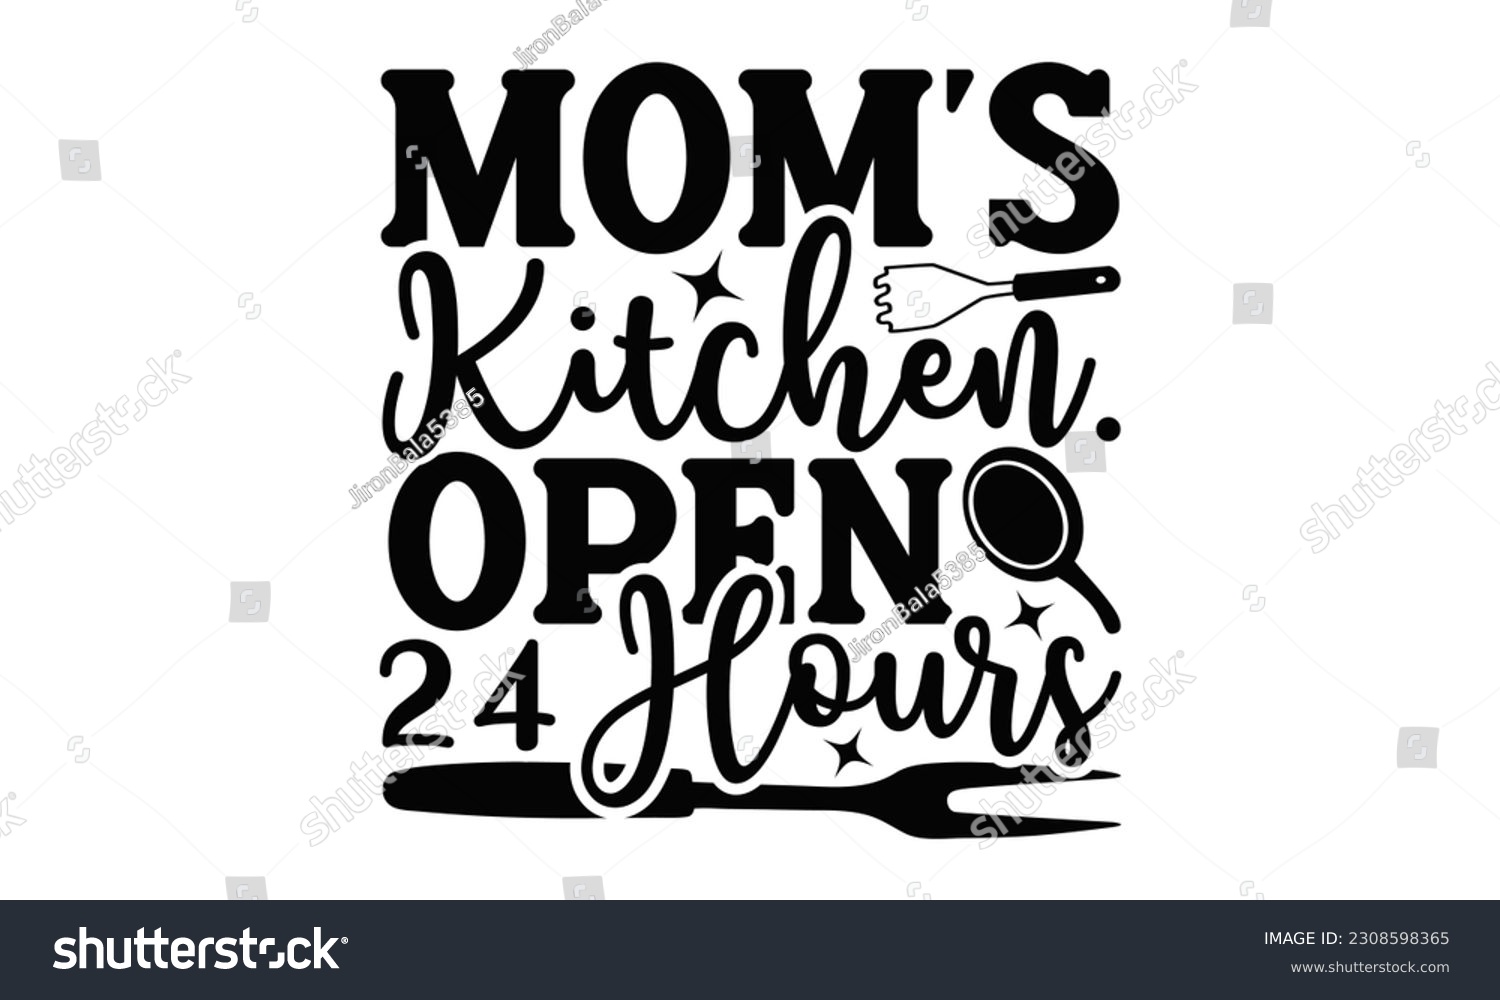 SVG of Mom’s Kitchen. Open 24 Hour - Cooking SVG Design, Isolated on white background, Illustration for prints on t-shirts, bags, posters, cards and Mug. svg